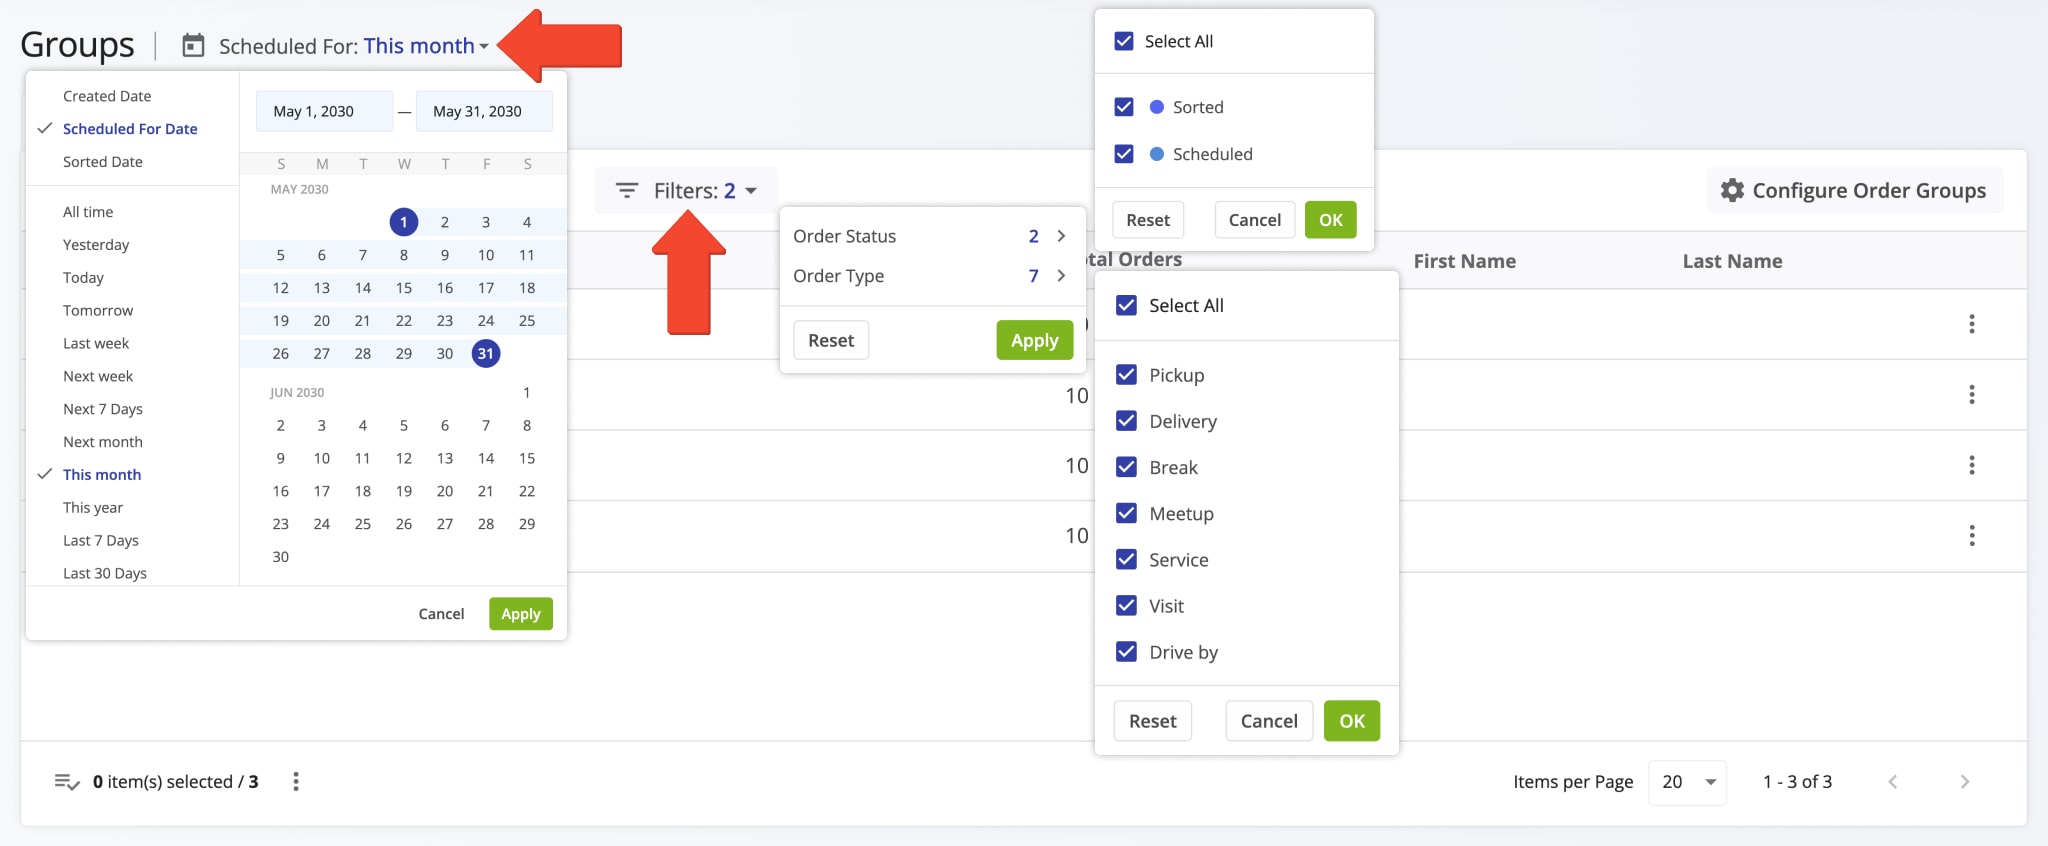 Assigning optimization profiles to custom Order Groups and filtering orders for recurring order route planning.